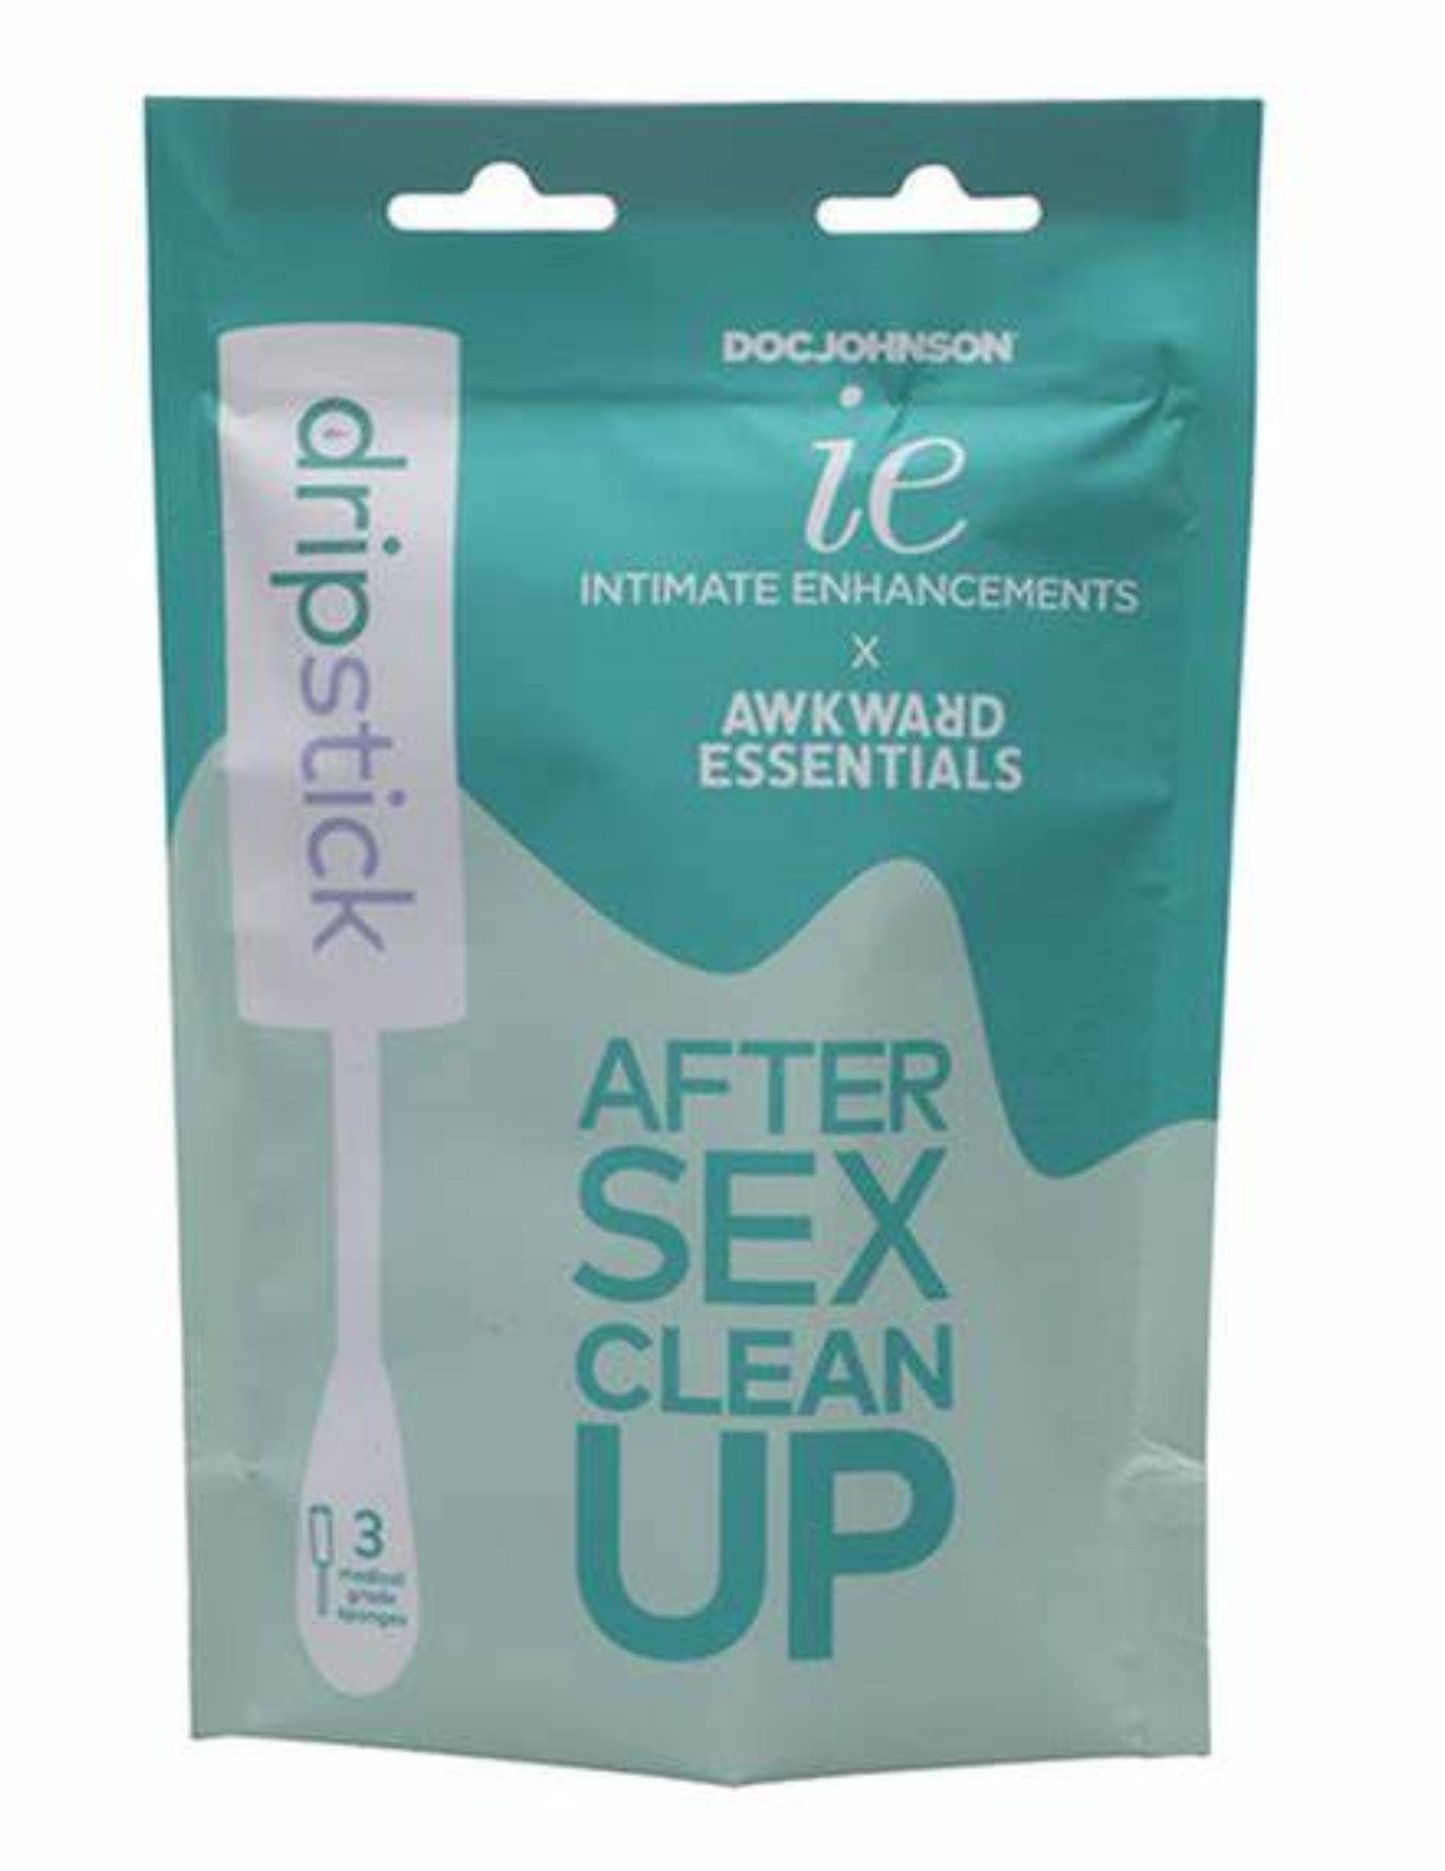 Photo of the package of After Clean Up Dripsticks (3pk) from Doc Johnson.